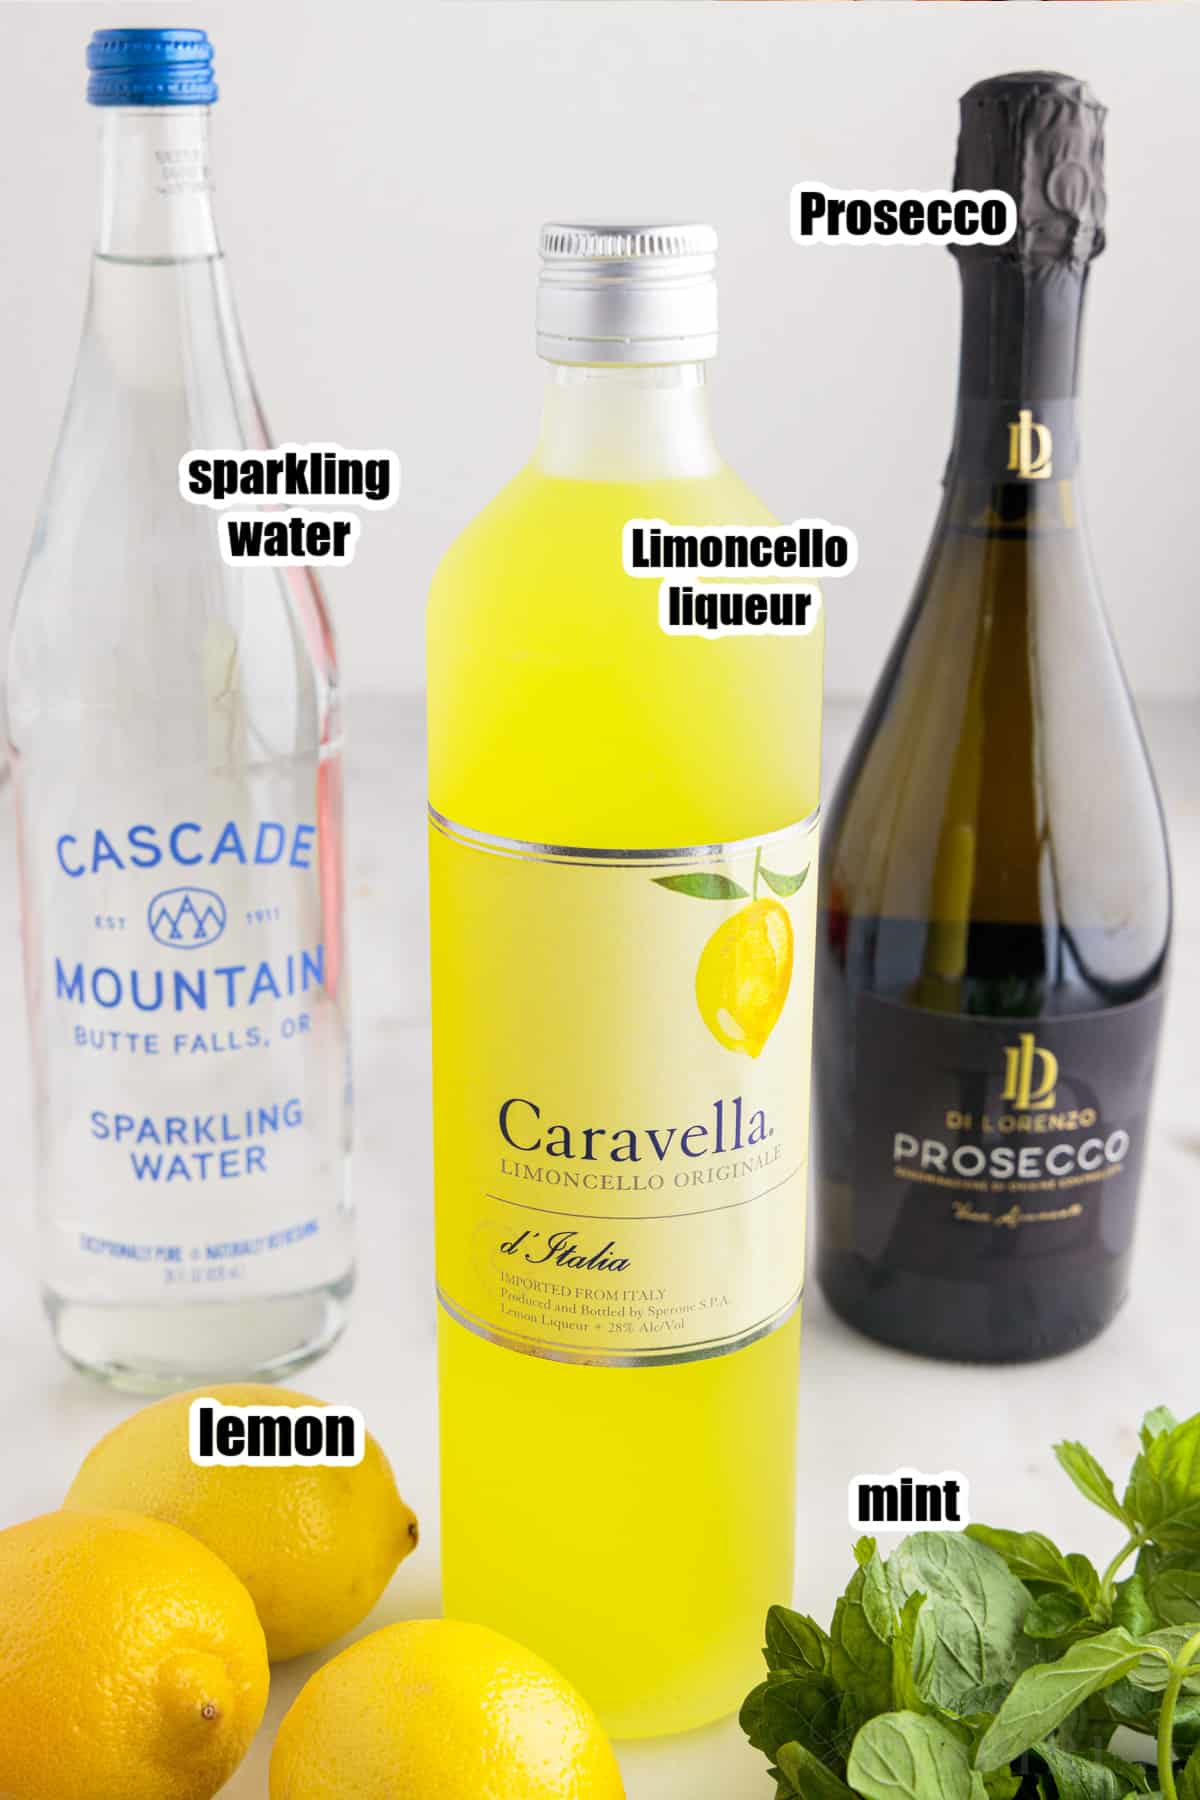 Sparkling water, Prosecco, and Limoncello bottles with mint and lemons in front of them.